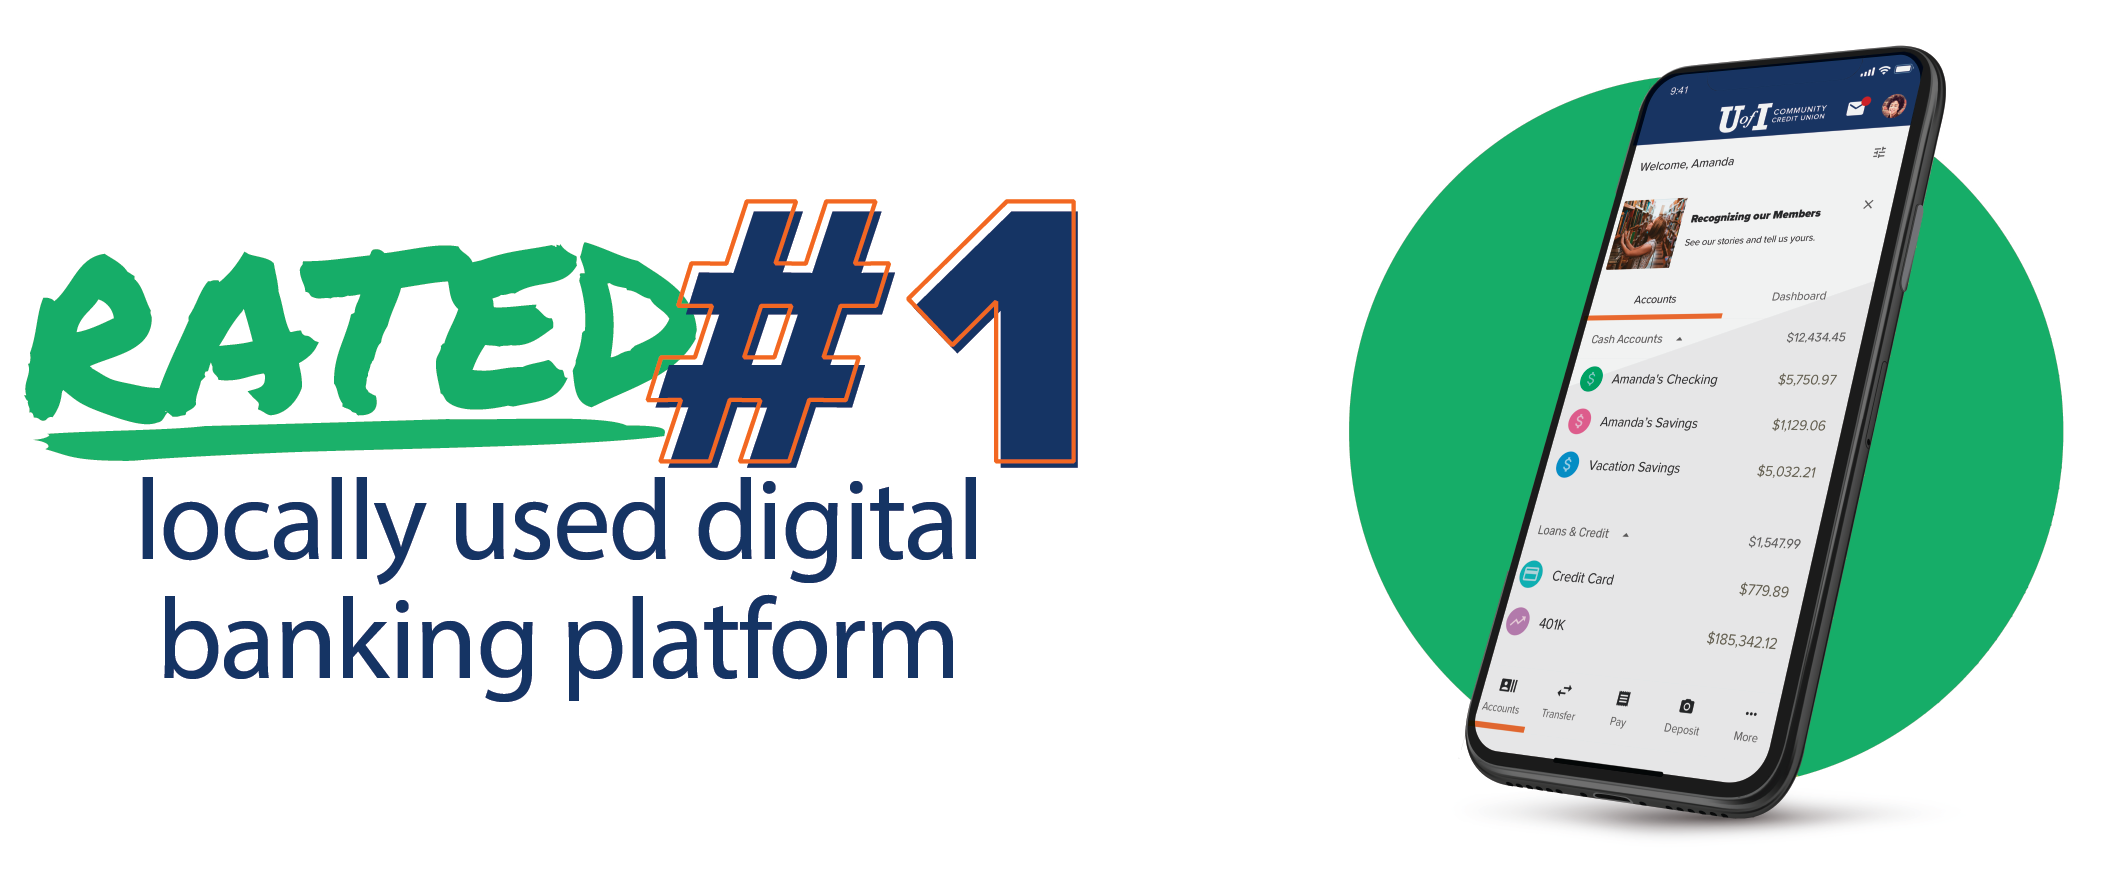 UICCU Digital Banking is rated the #1 locally used digital banking platform